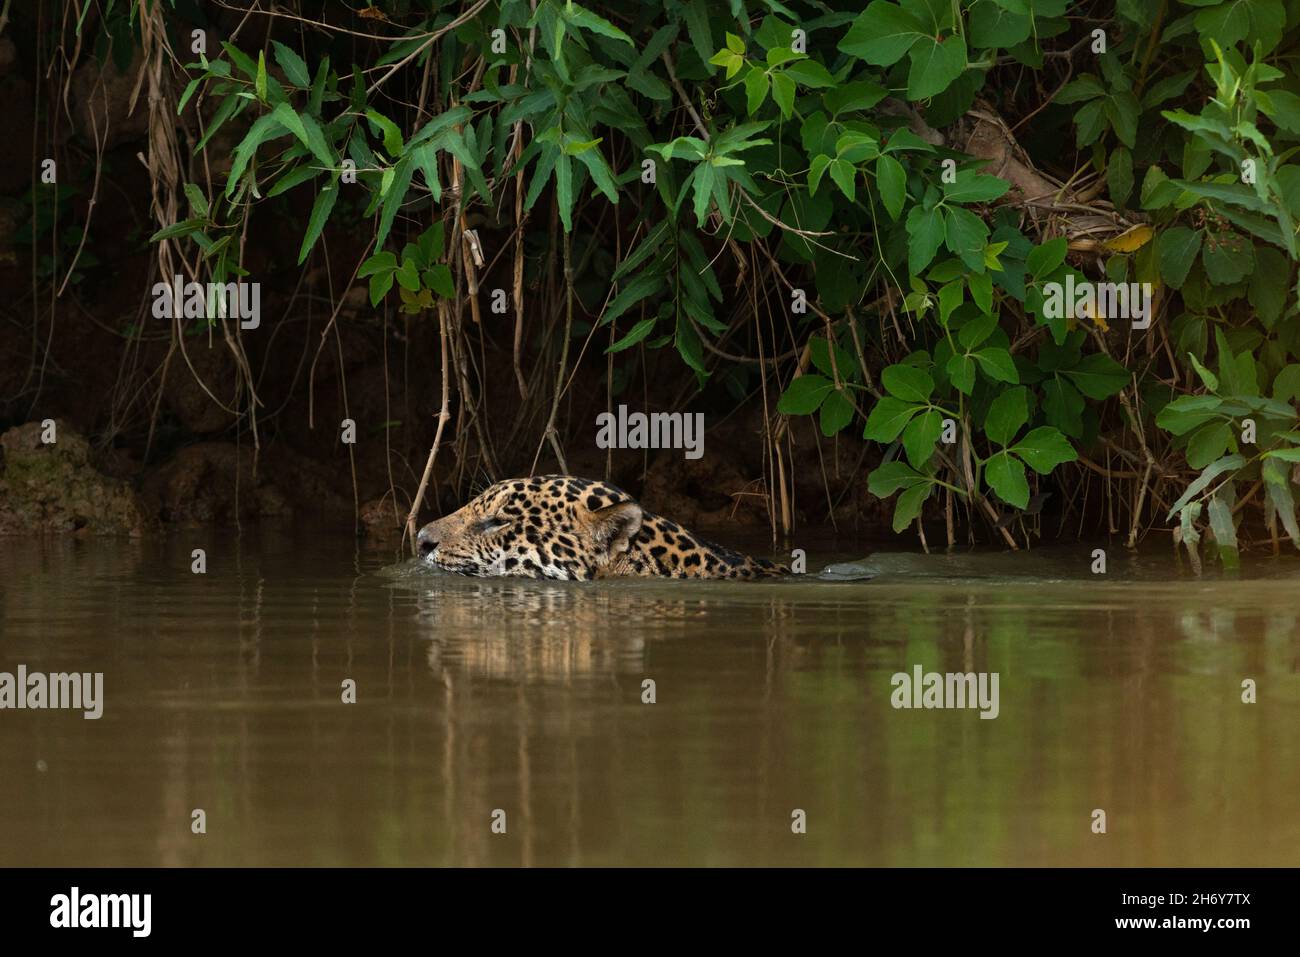 A Jaguar swimming in a river of North Pantanal, Brazil Stock Photo